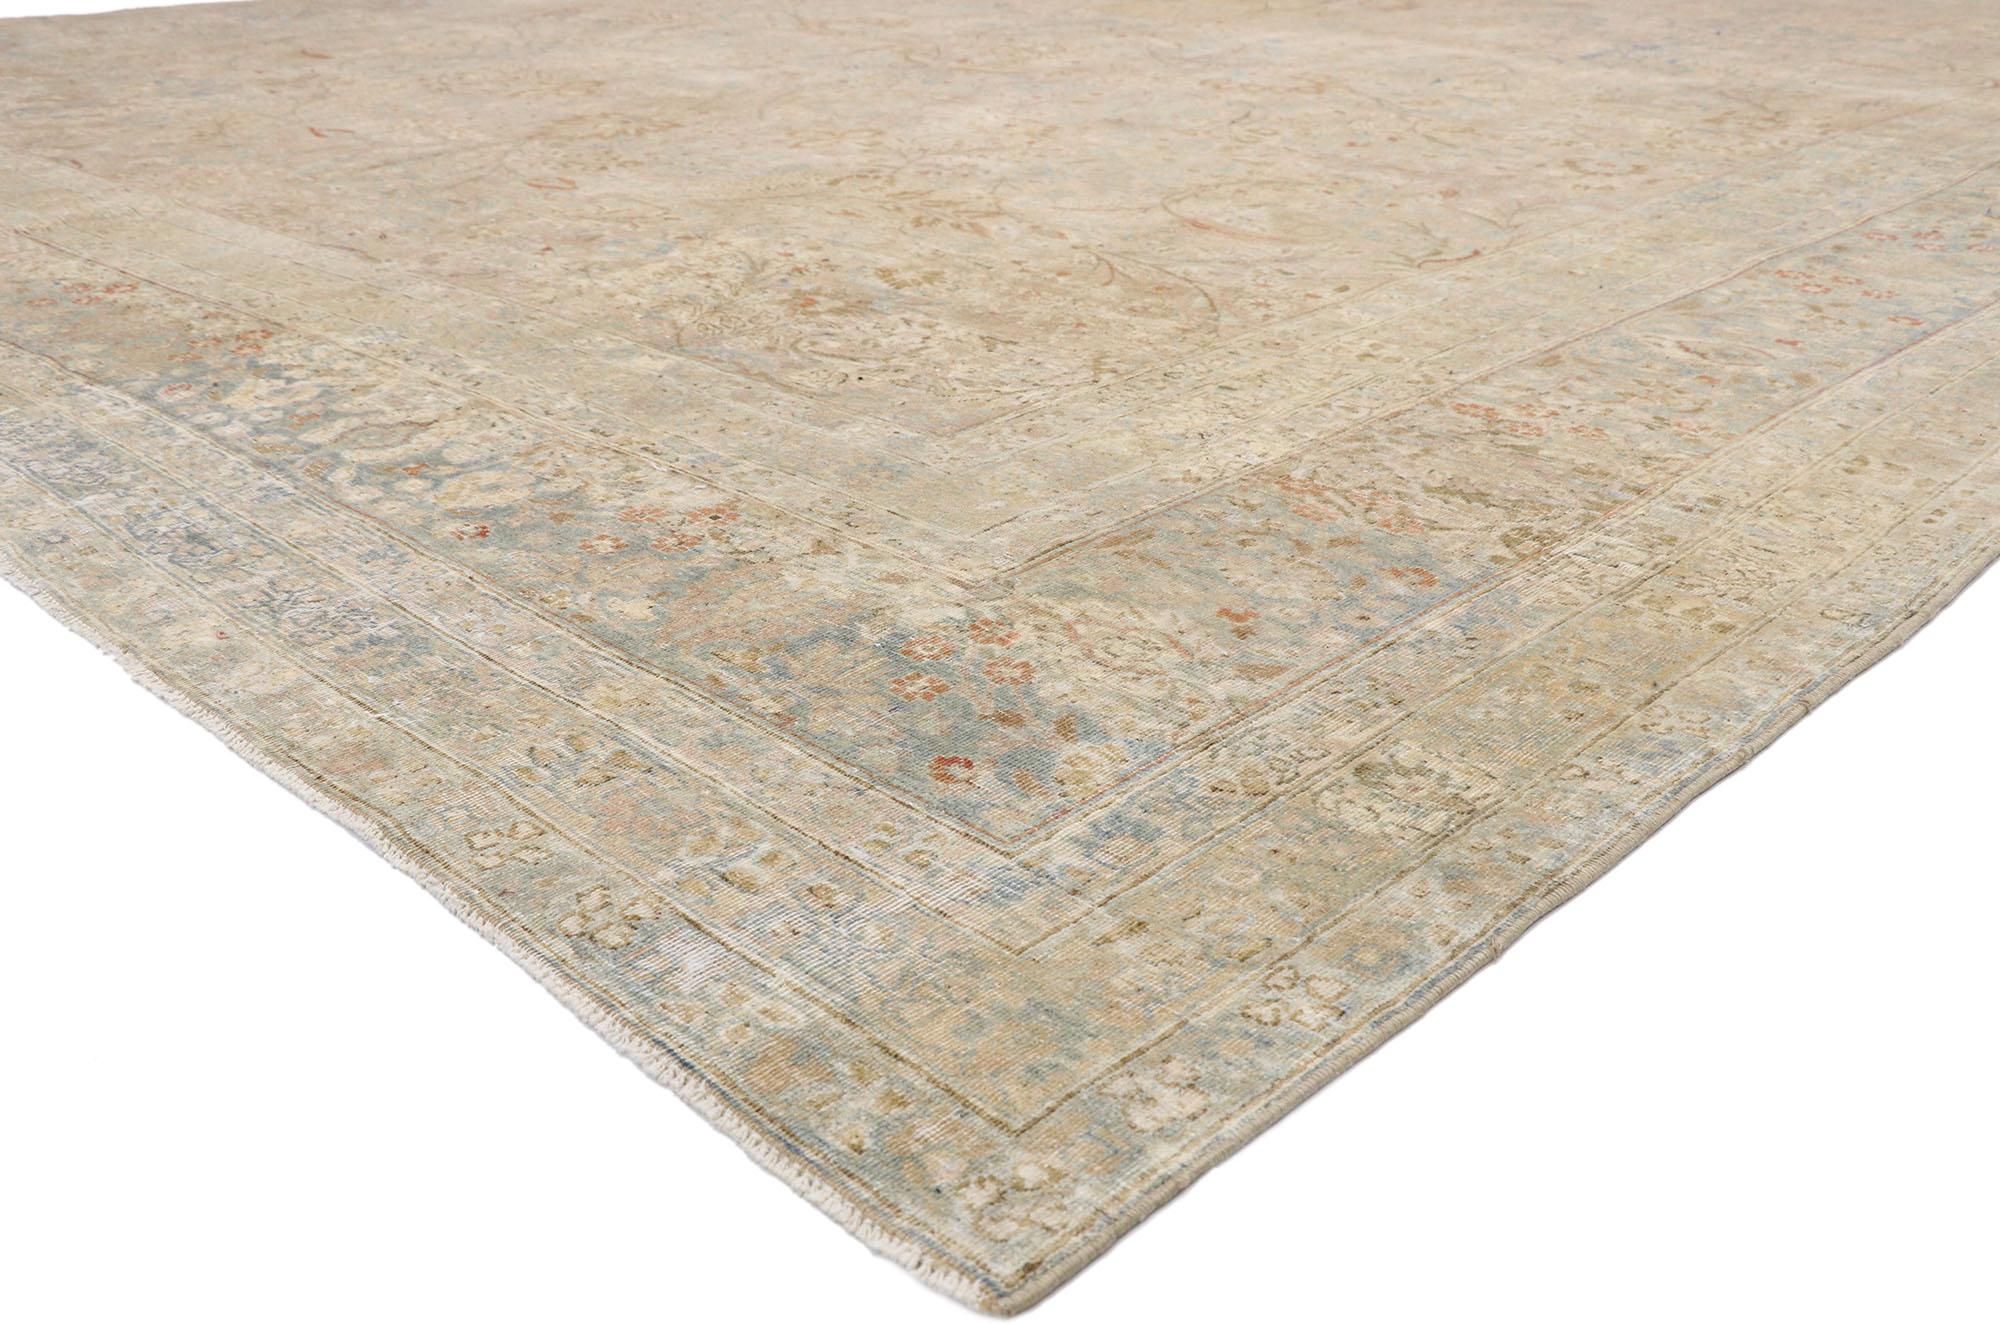 52678 Distressed Antique Turkish Khorassan Rug, 12'07 x 14'03. Distressed antique wash Turkish Khorassan rugs are traditional rugs originating from Turkey, drawing inspiration from the renowned rug-weaving tradition of the Khorassan region in Iran.